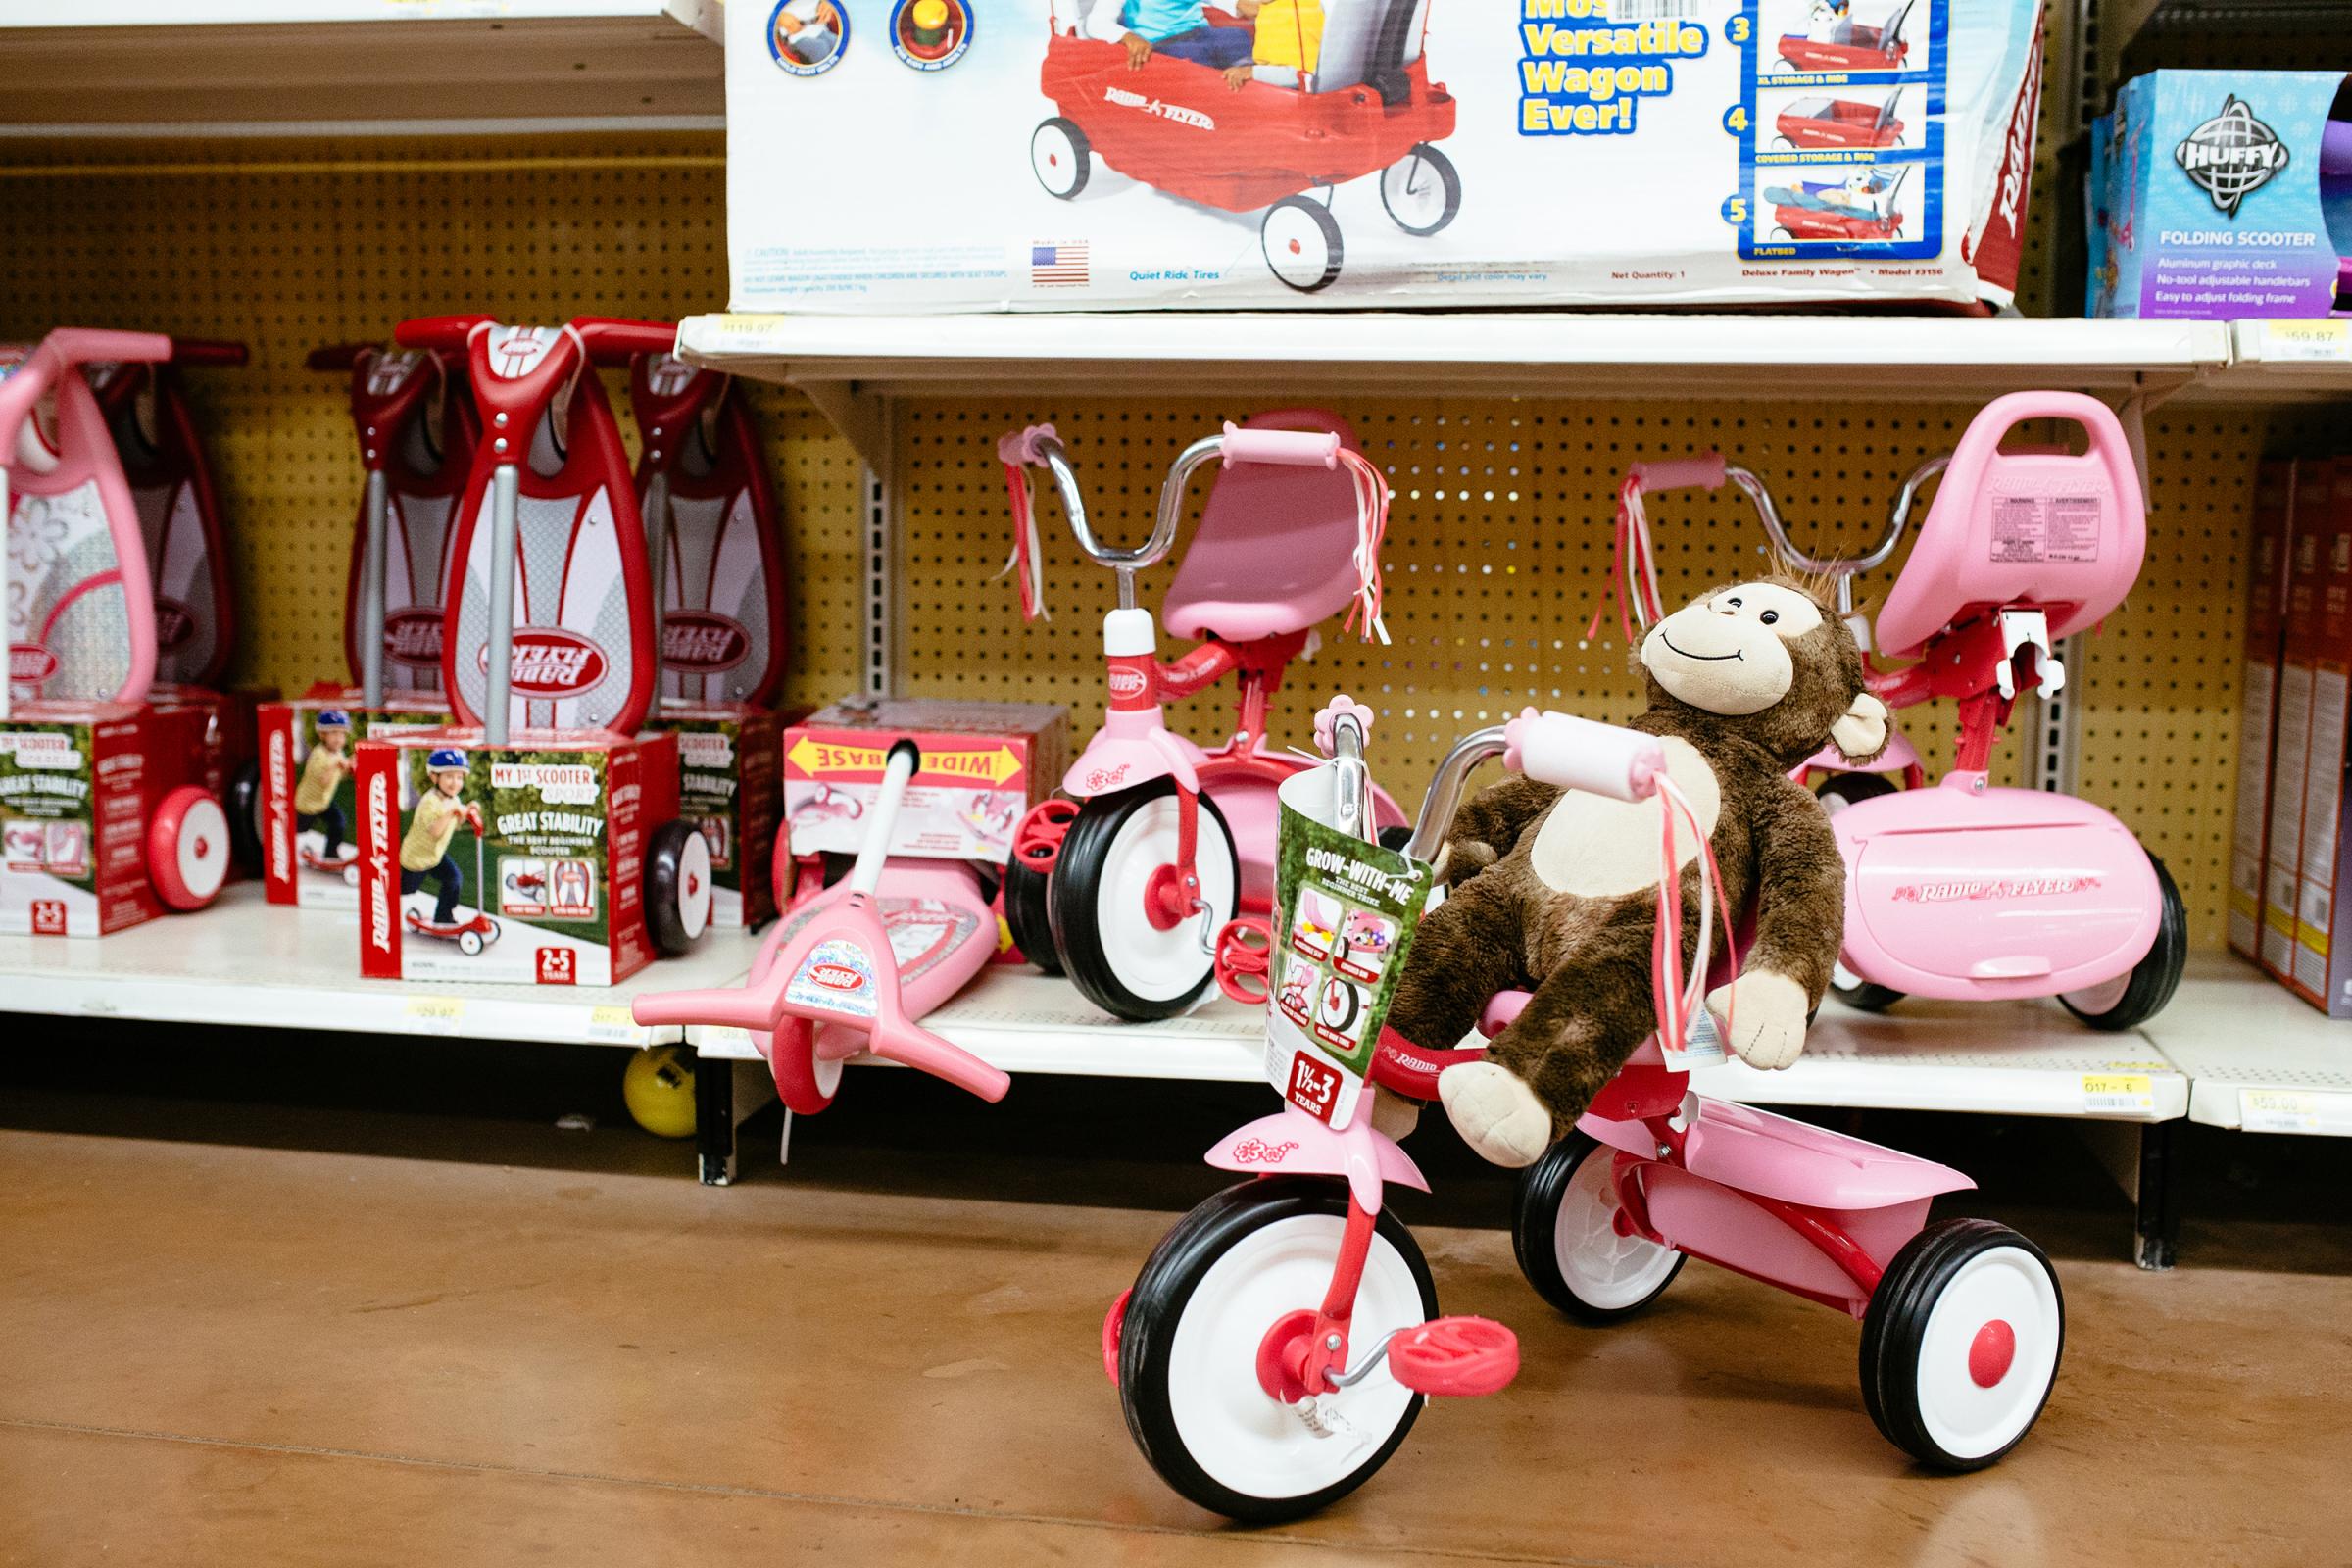 George the Monkey on a pink tricycle in the toy store